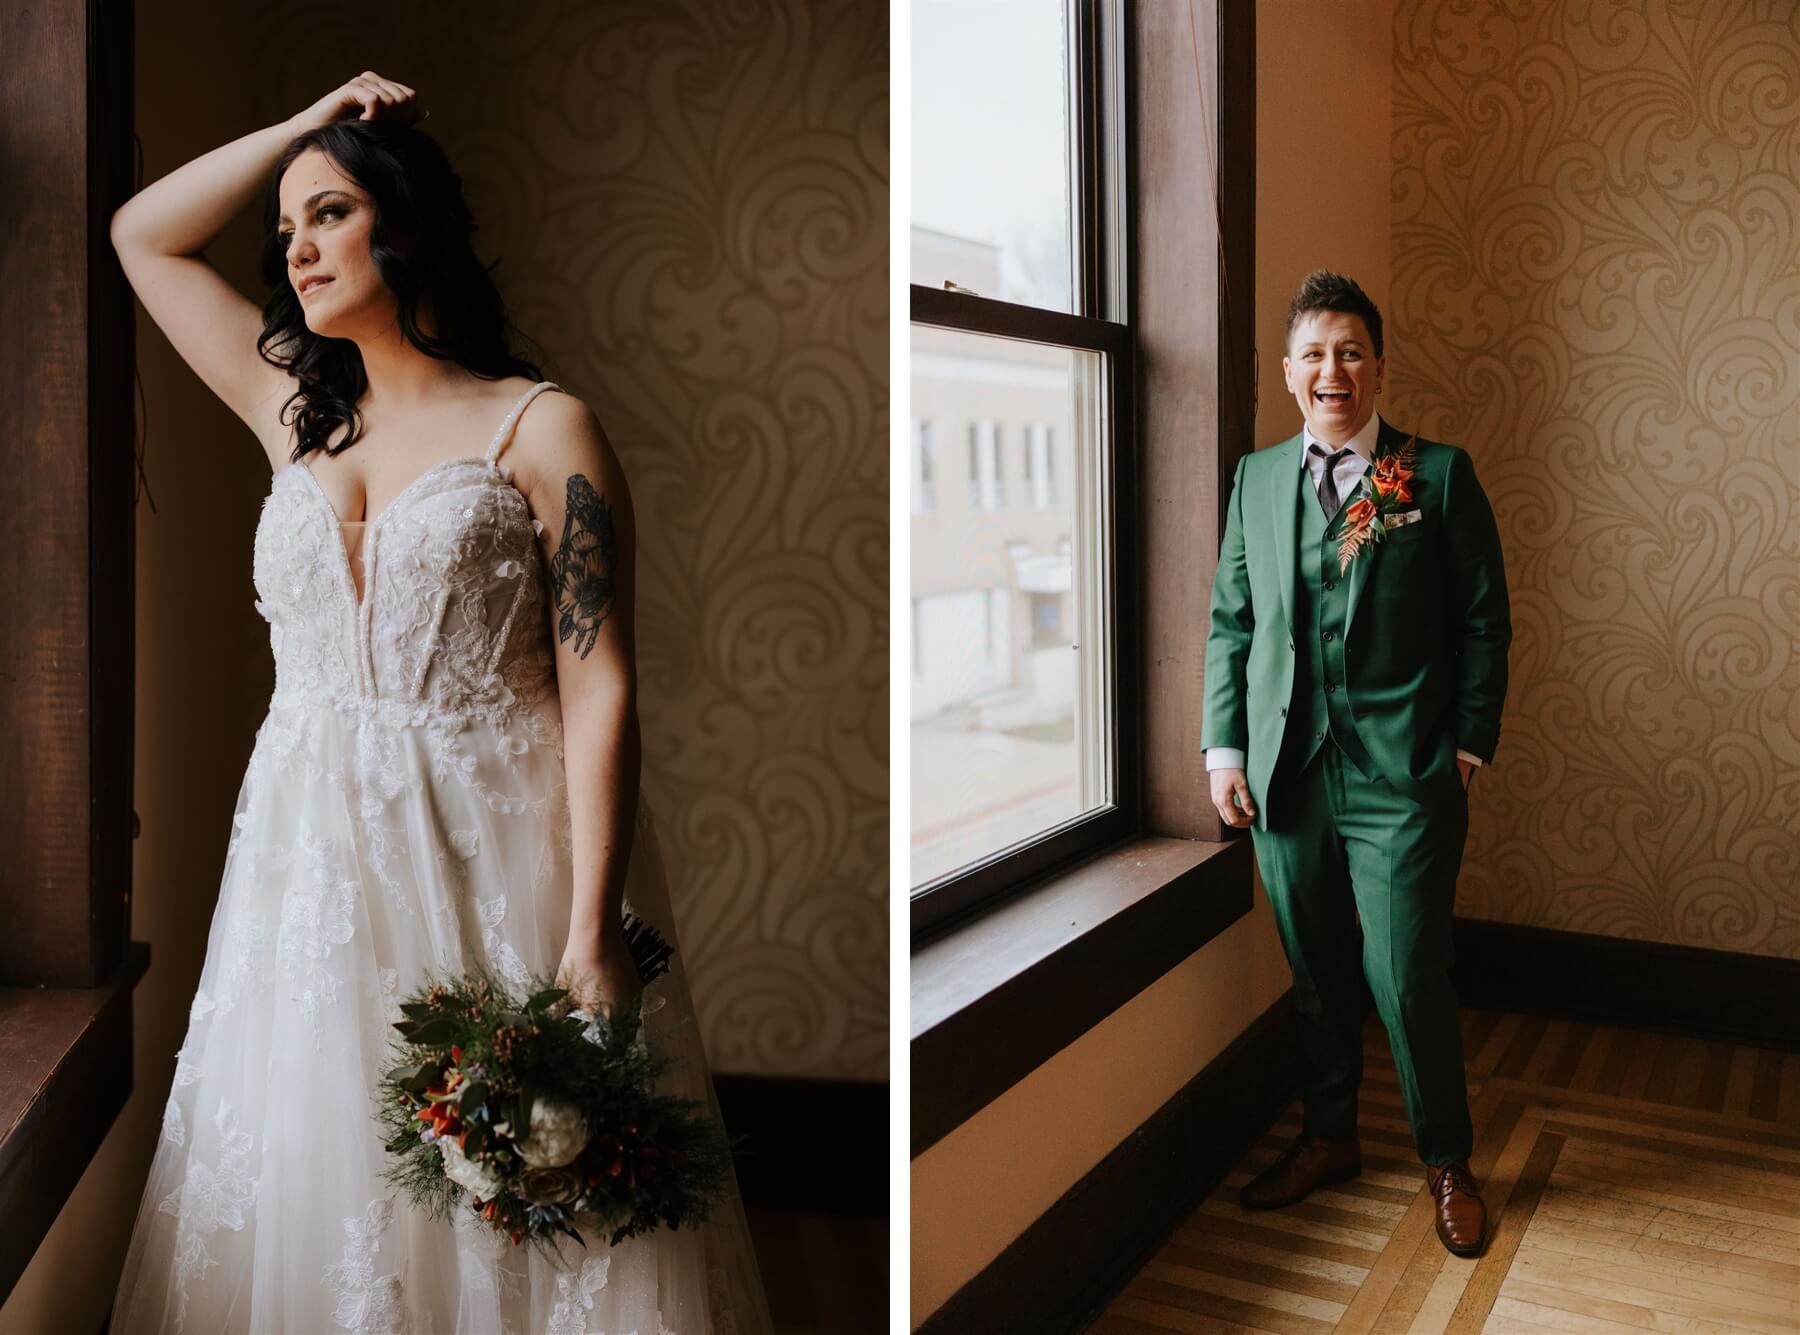 Couple standing by window separately on wedding day